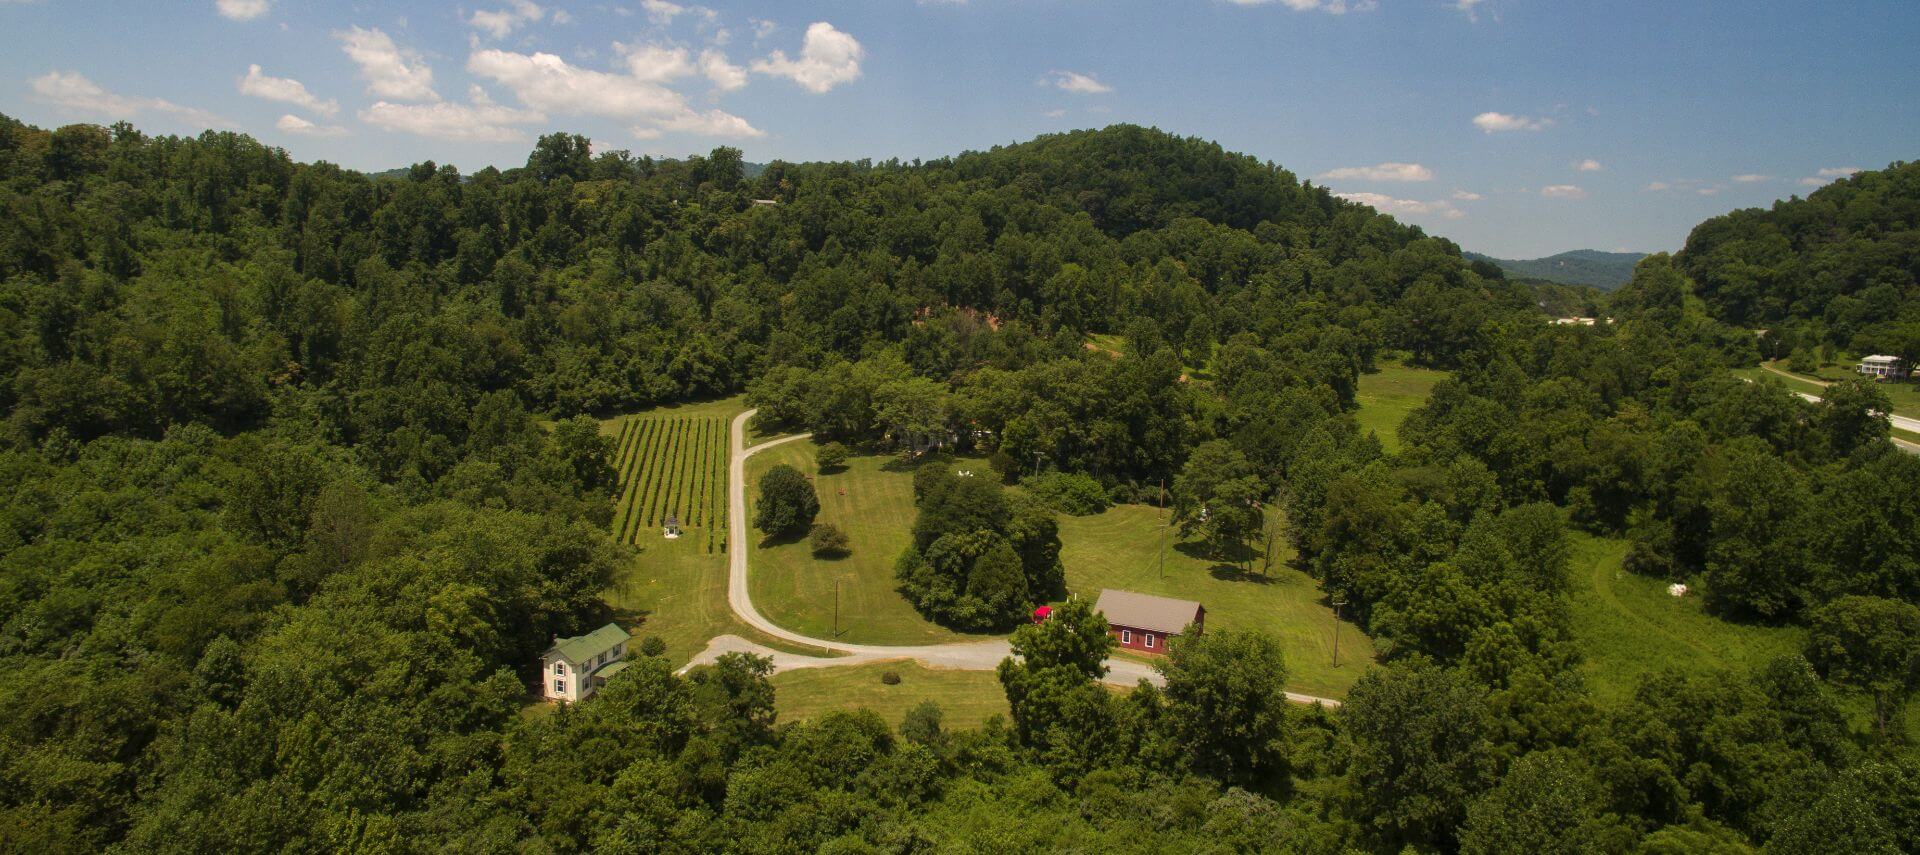 Overhead arial view of white manor house and yellow farmhouse on expansive grounds.